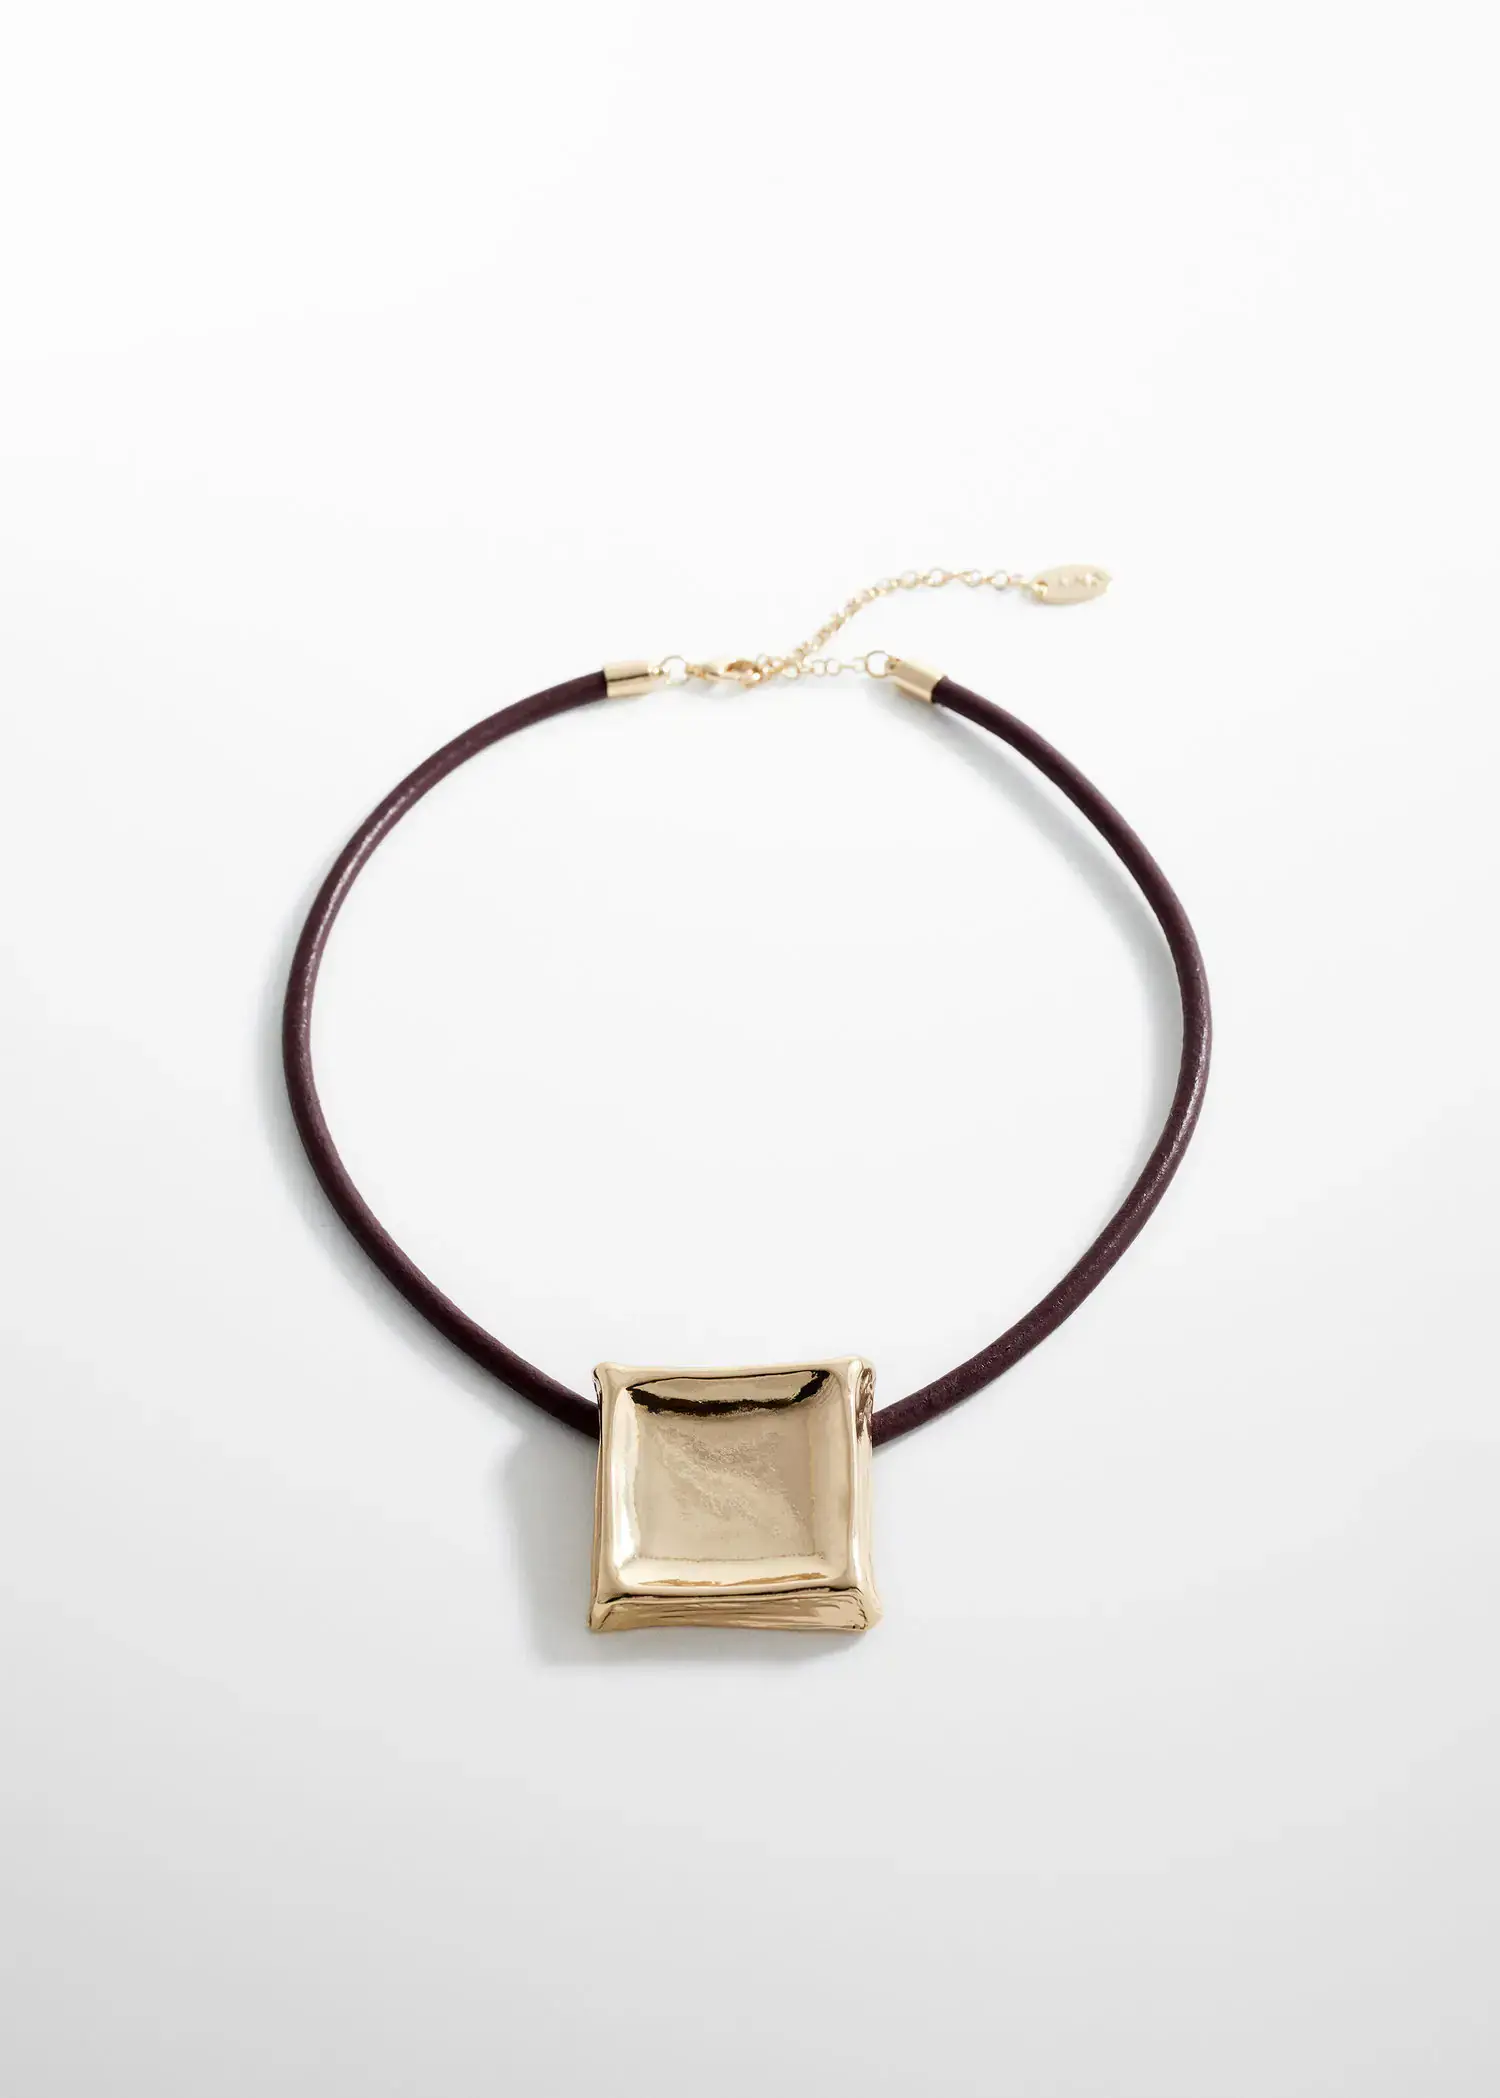 Mango Leather cord necklace. 2